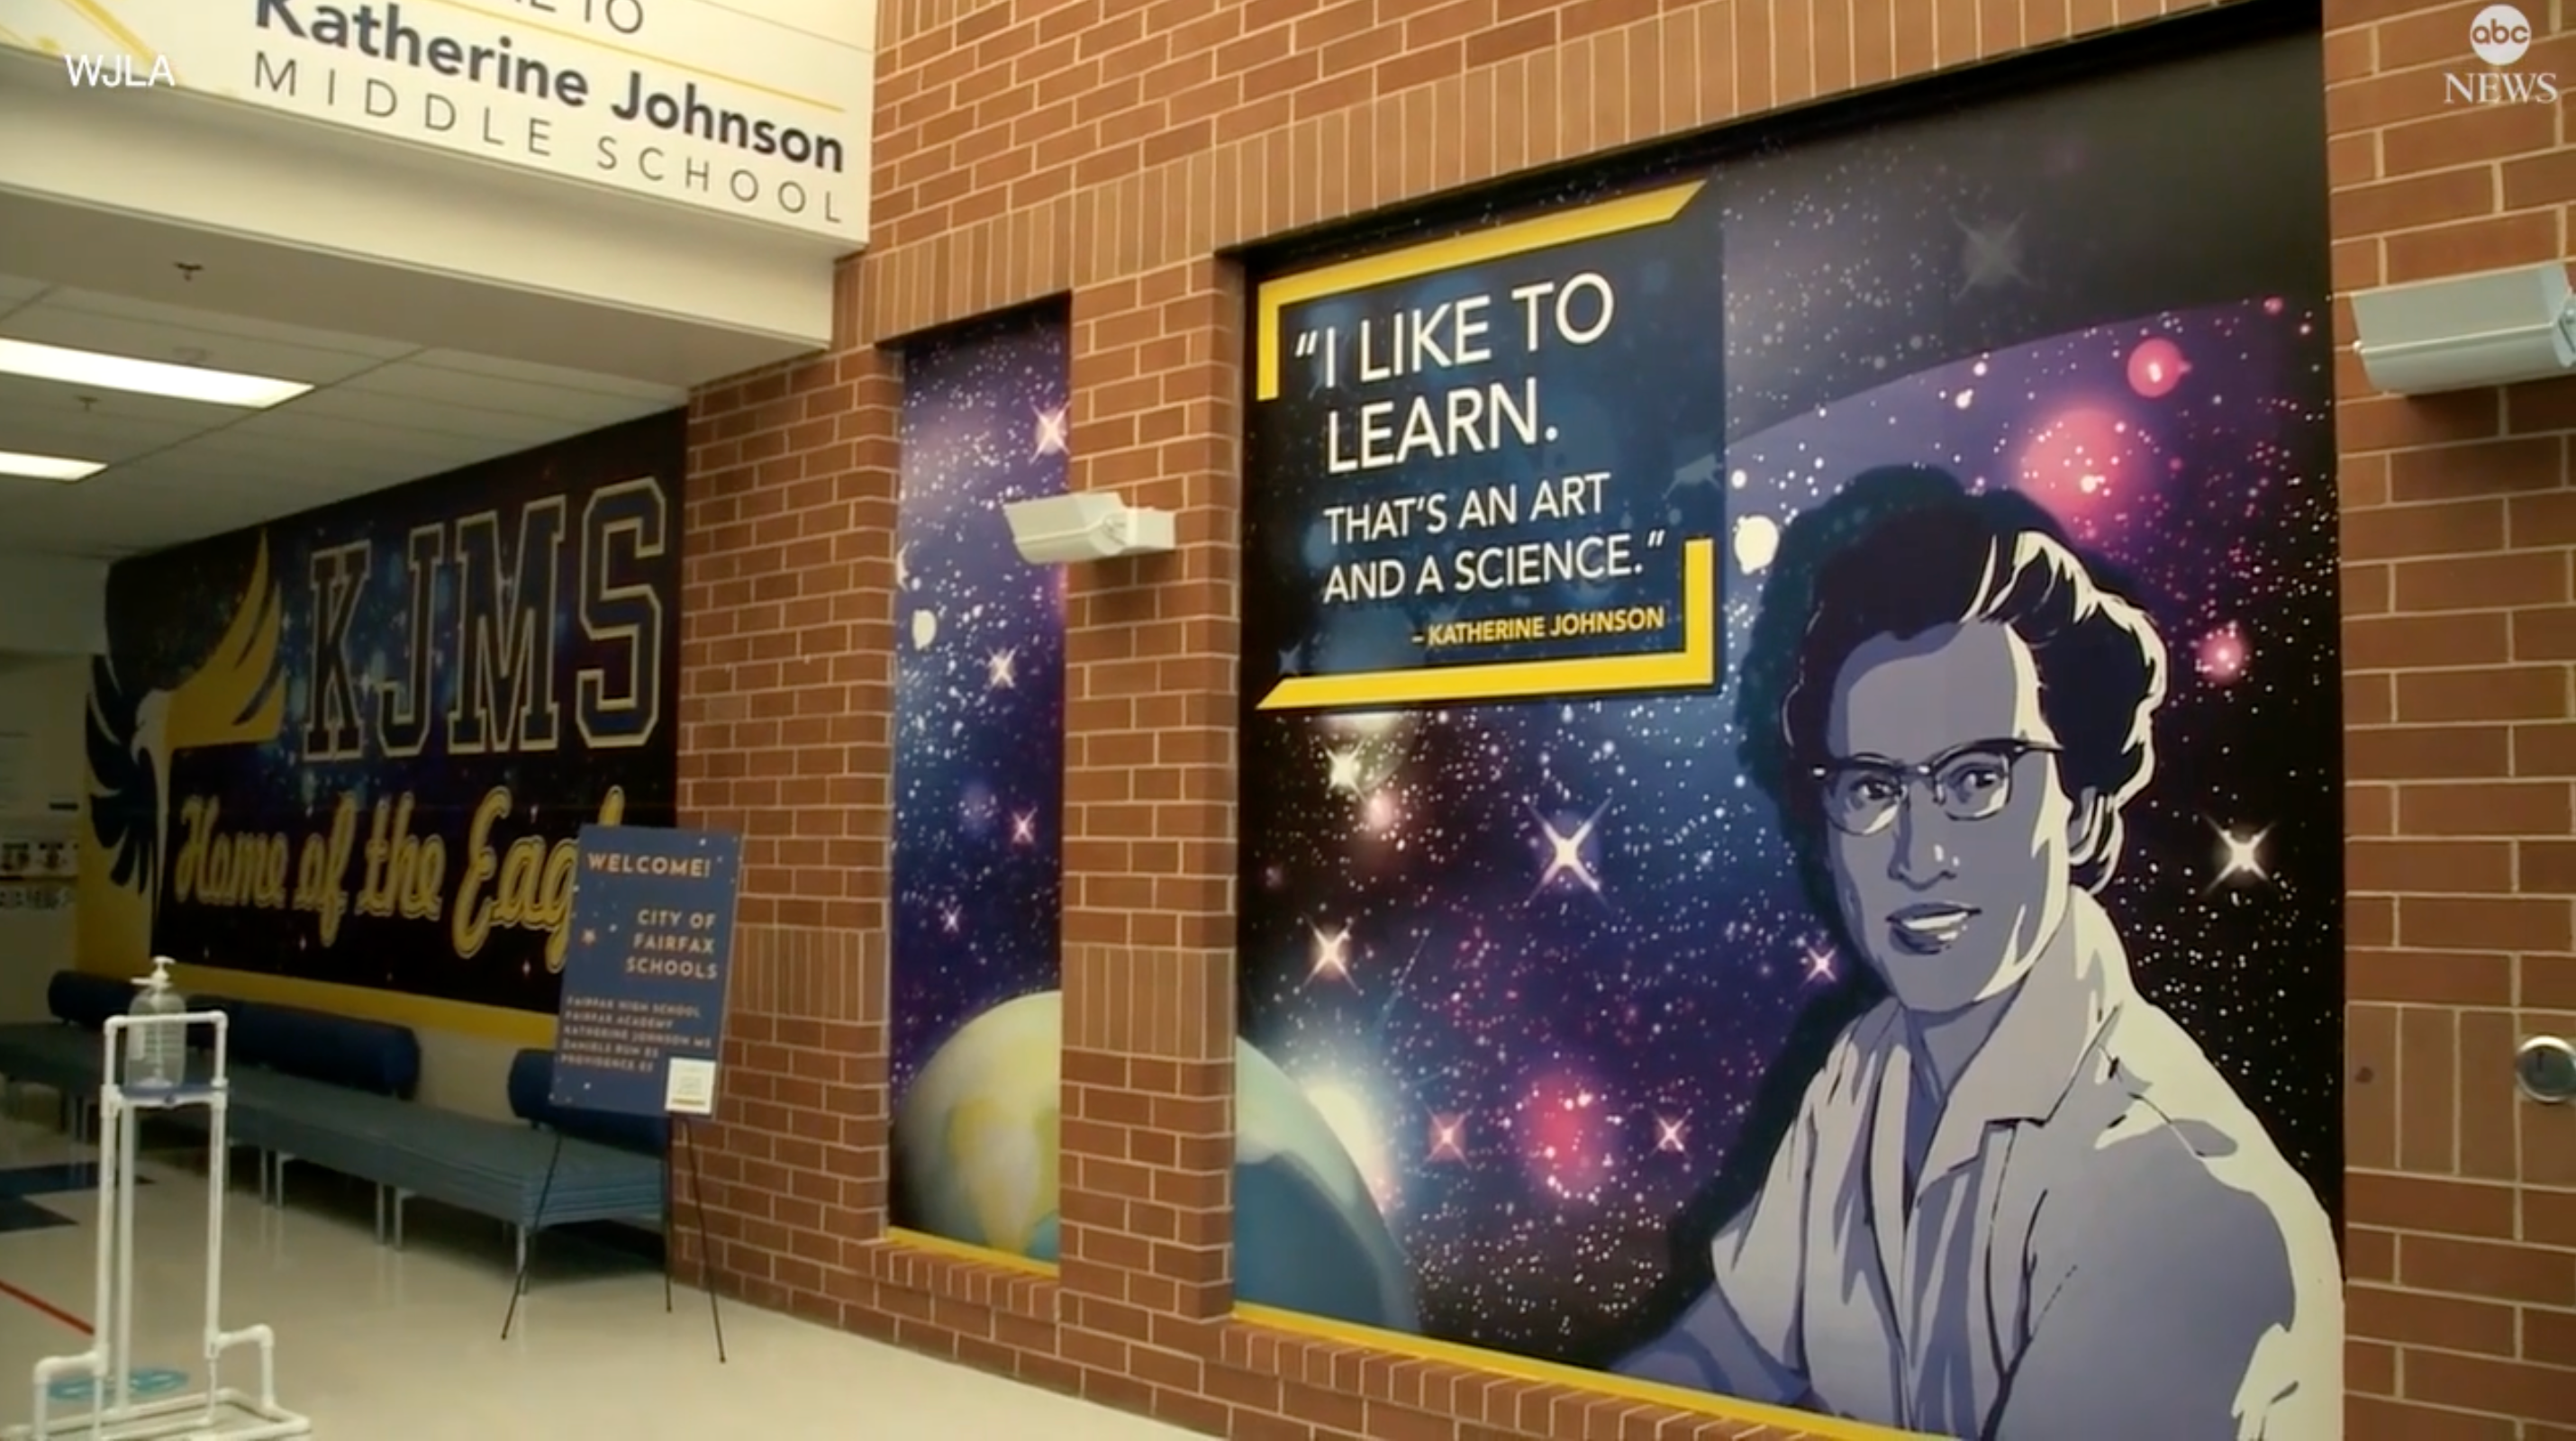 School in Virginia has changed their name to celebrate the contributions of a Black woman mathematician Katherine Johnson.